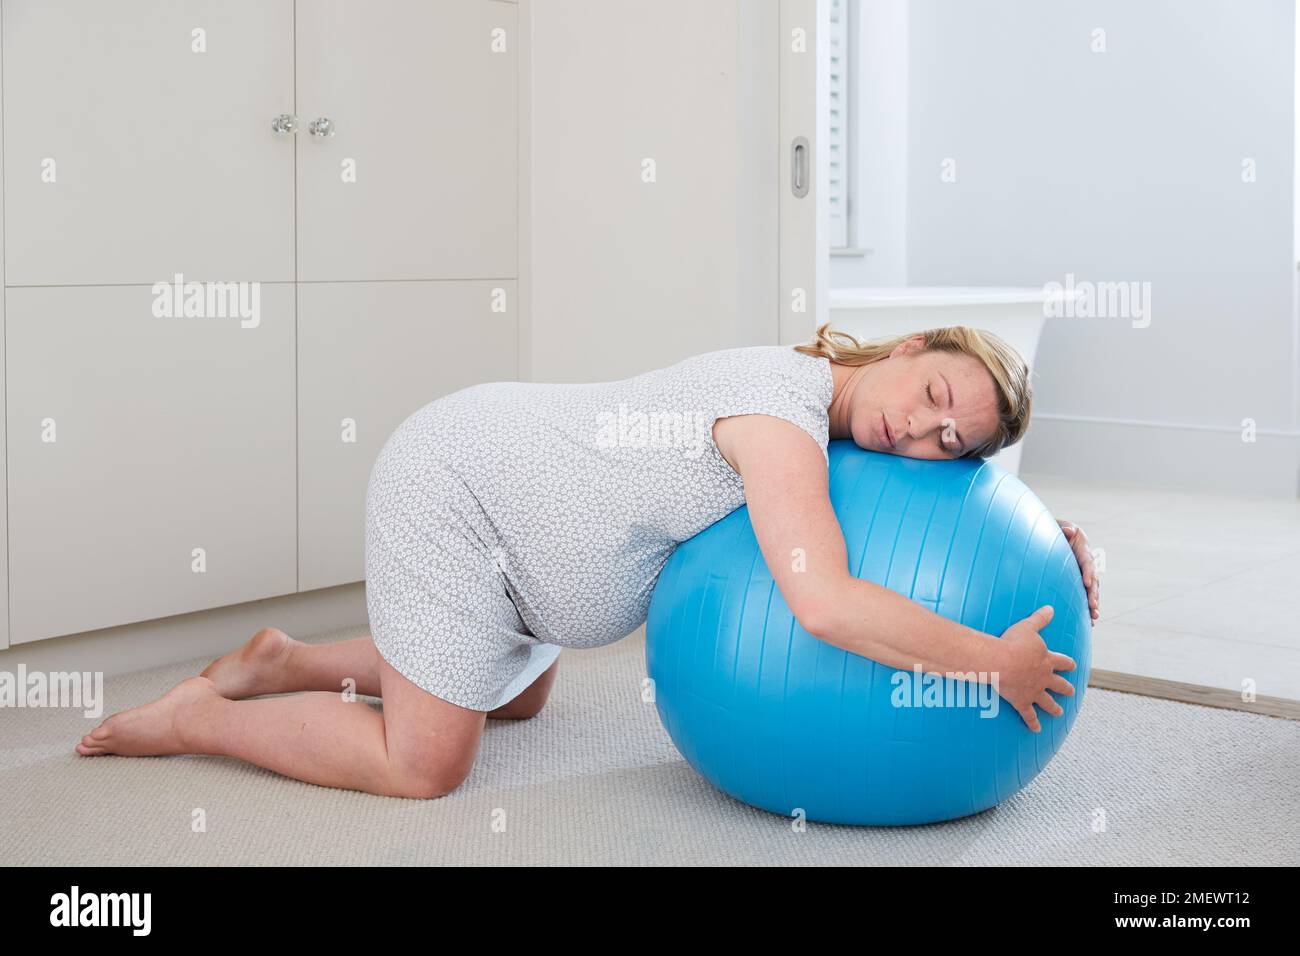 9 months / 40 weeks pregnant in labour at home. Kneeling with a birthibg ball, active phase of labour. Stock Photo